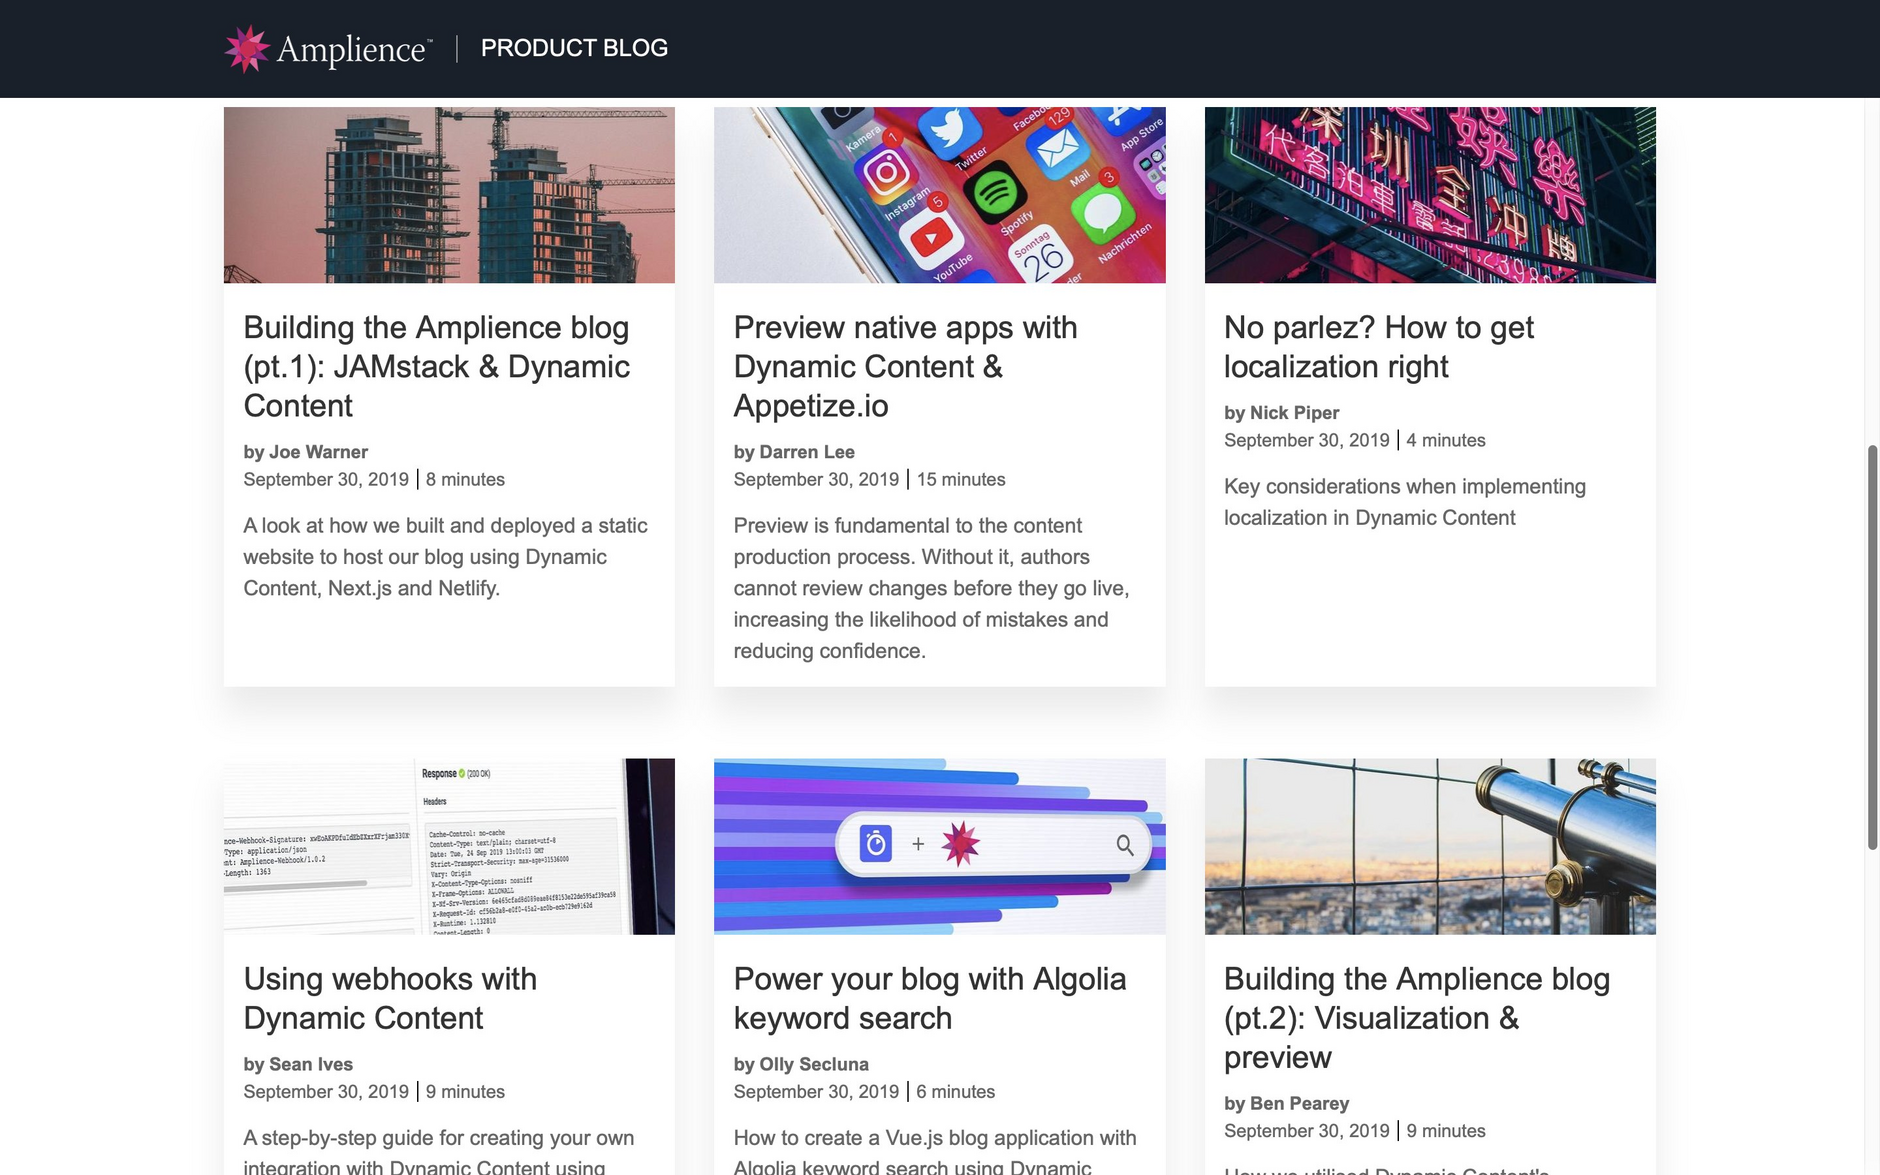 The Amplience product blog provides a mixture of developer and practitioner content from the product and engineering teams